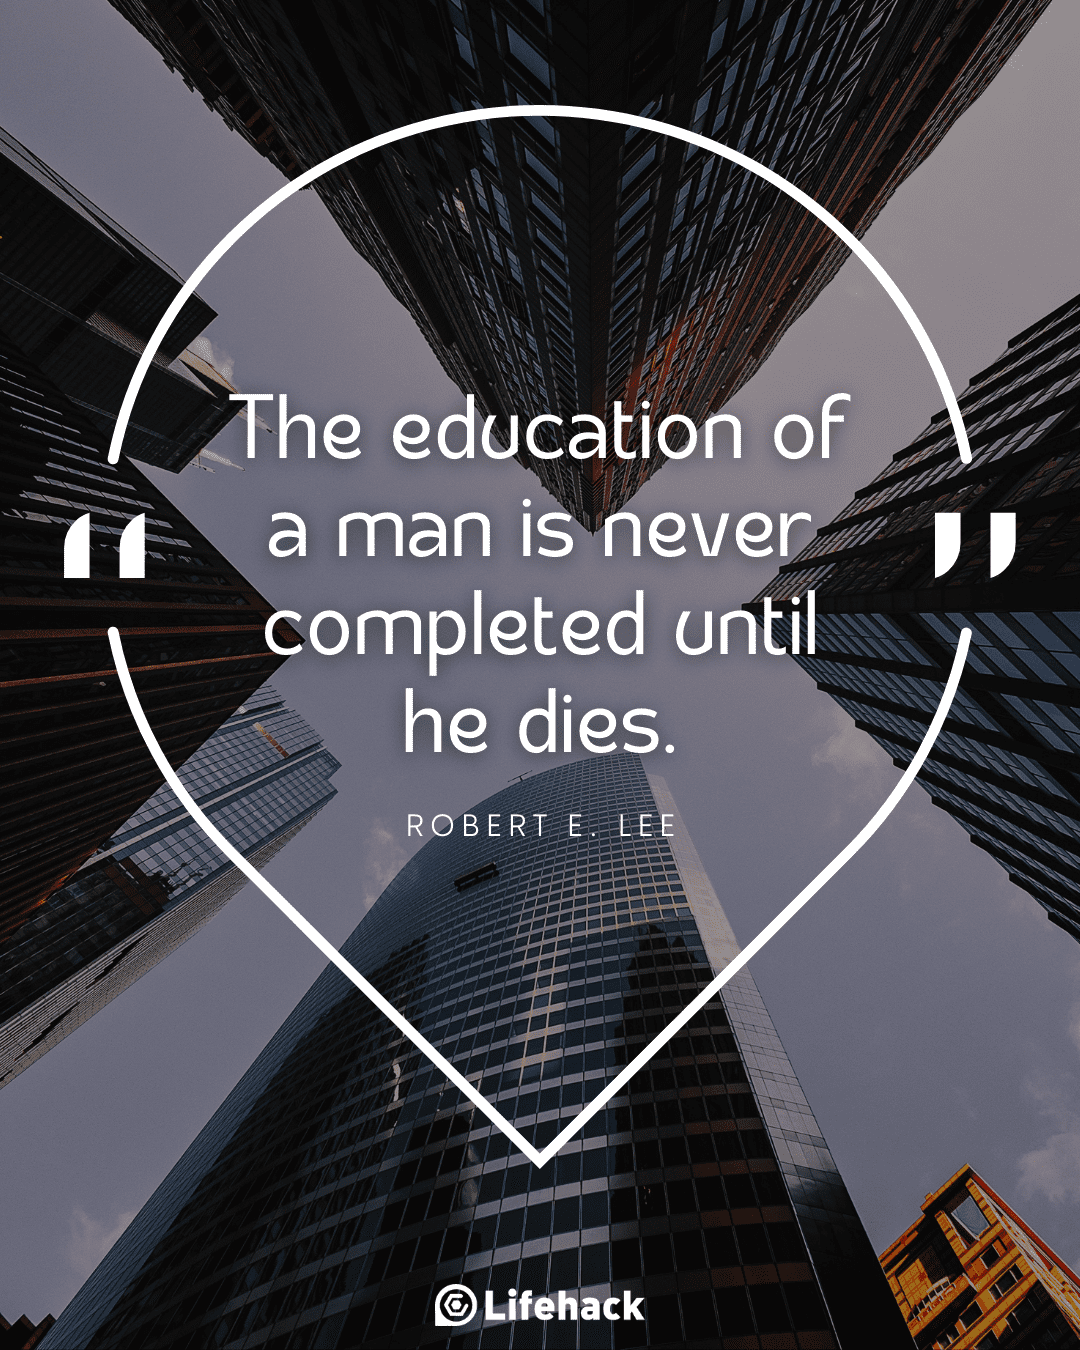 30 Best Quotes to Inspire You to Never Stop Learning